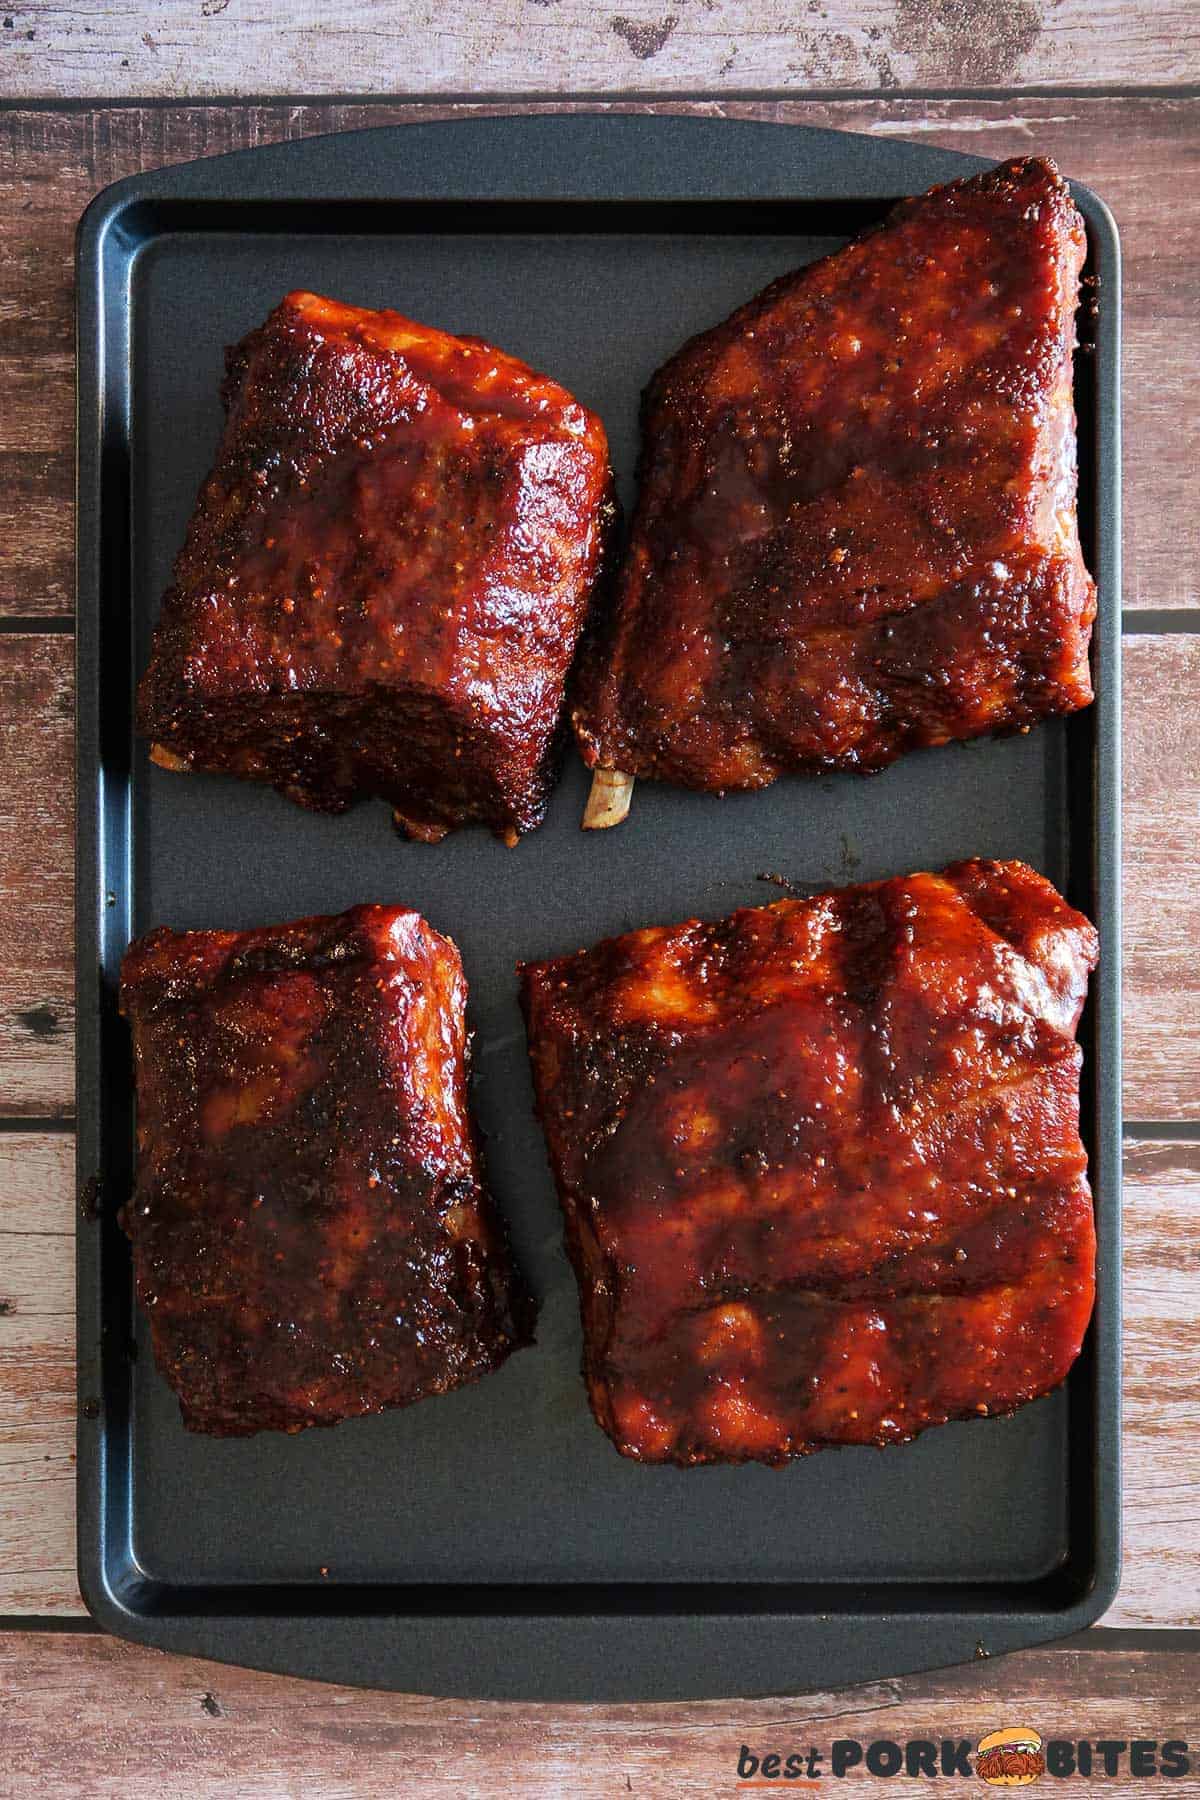 four slices of ribs covered in BBQ sauce on a baking tray